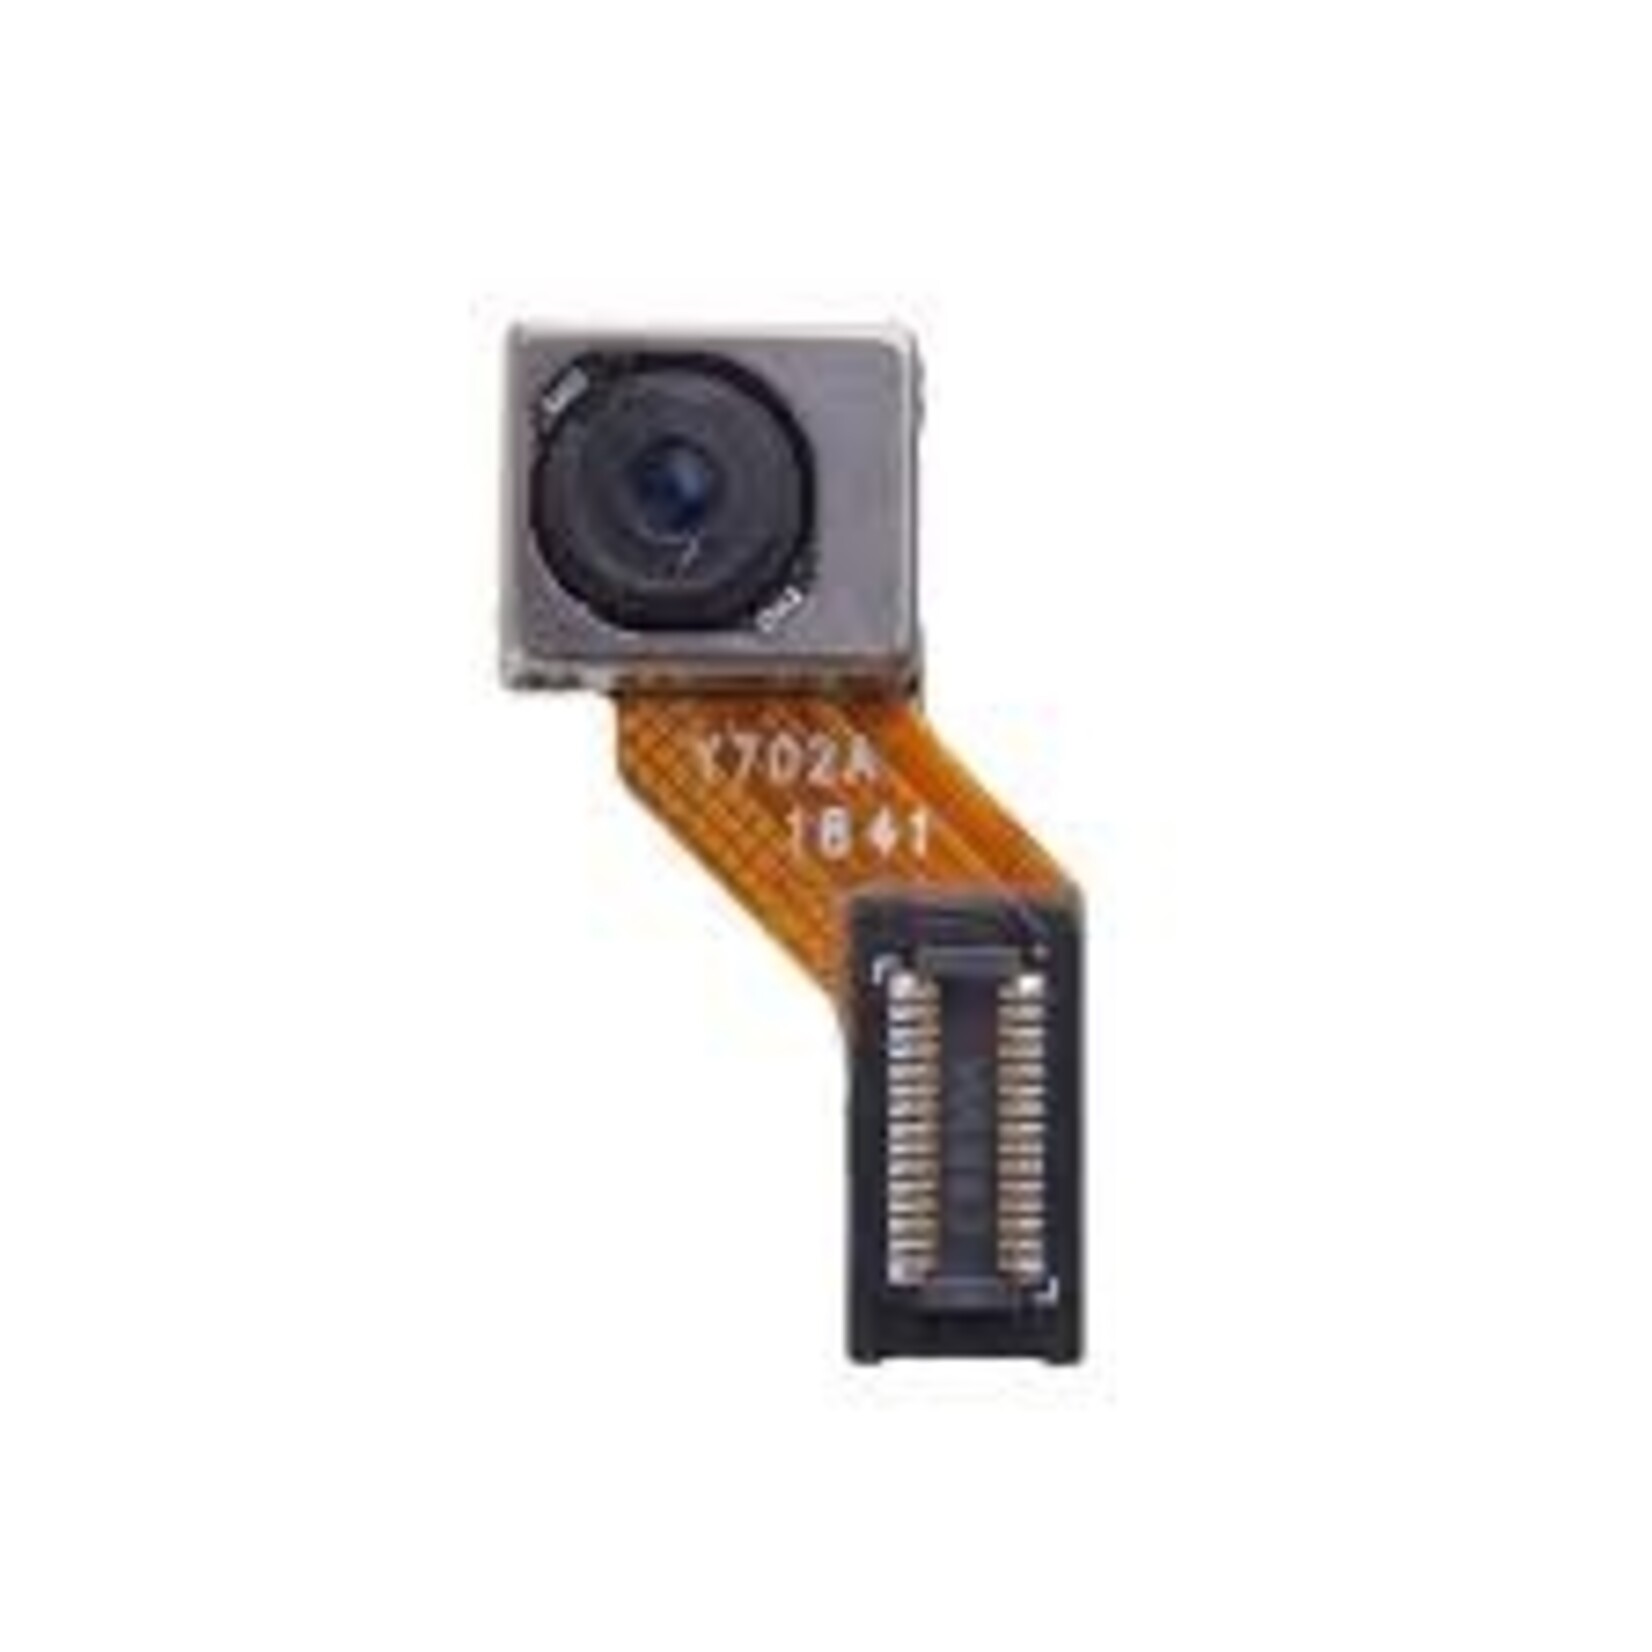 LG front camera for LG G8 G820 ThinQ